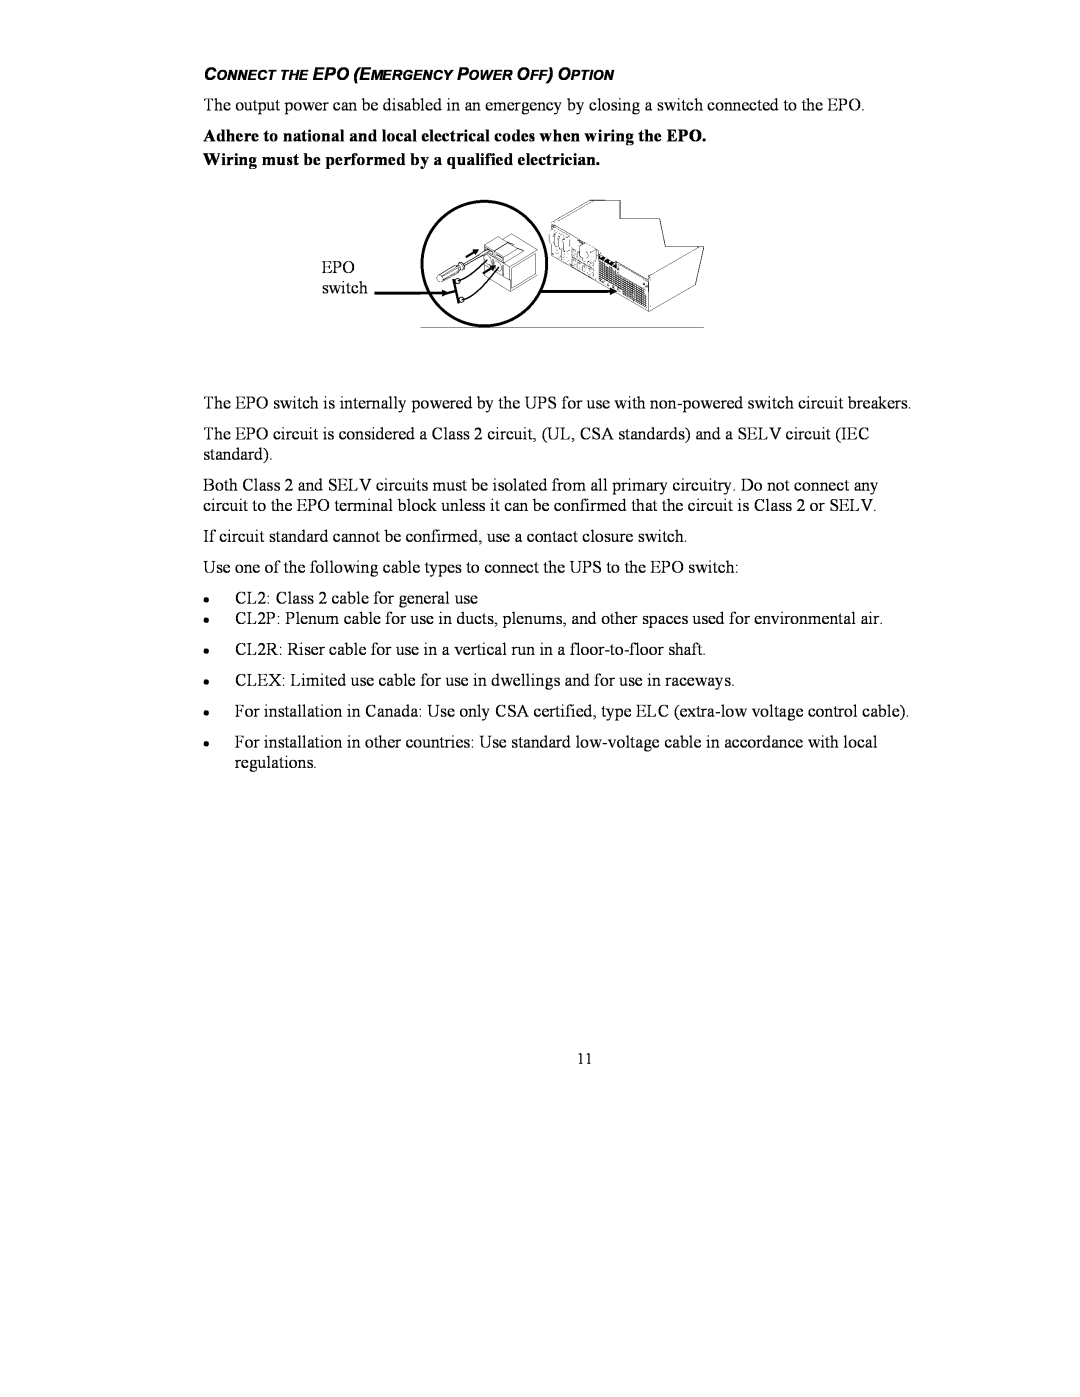 American Power Conversion UXI/UXICH user manual Adhere to national and local electrical codes when wiring the EPO 